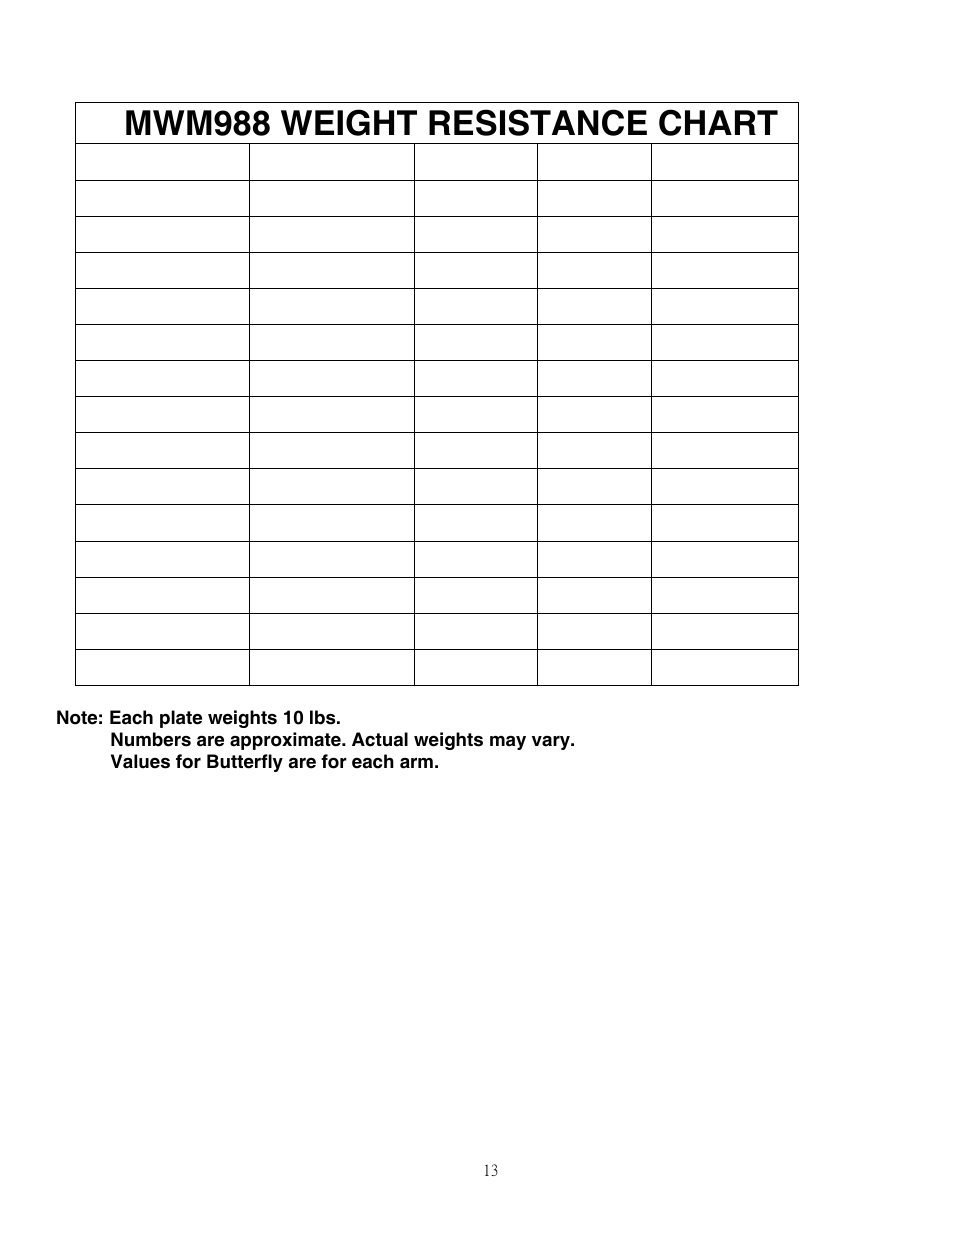 Mwm988 weight resistance chart | Impex MWM-988 User Manual | Page 14 / 15